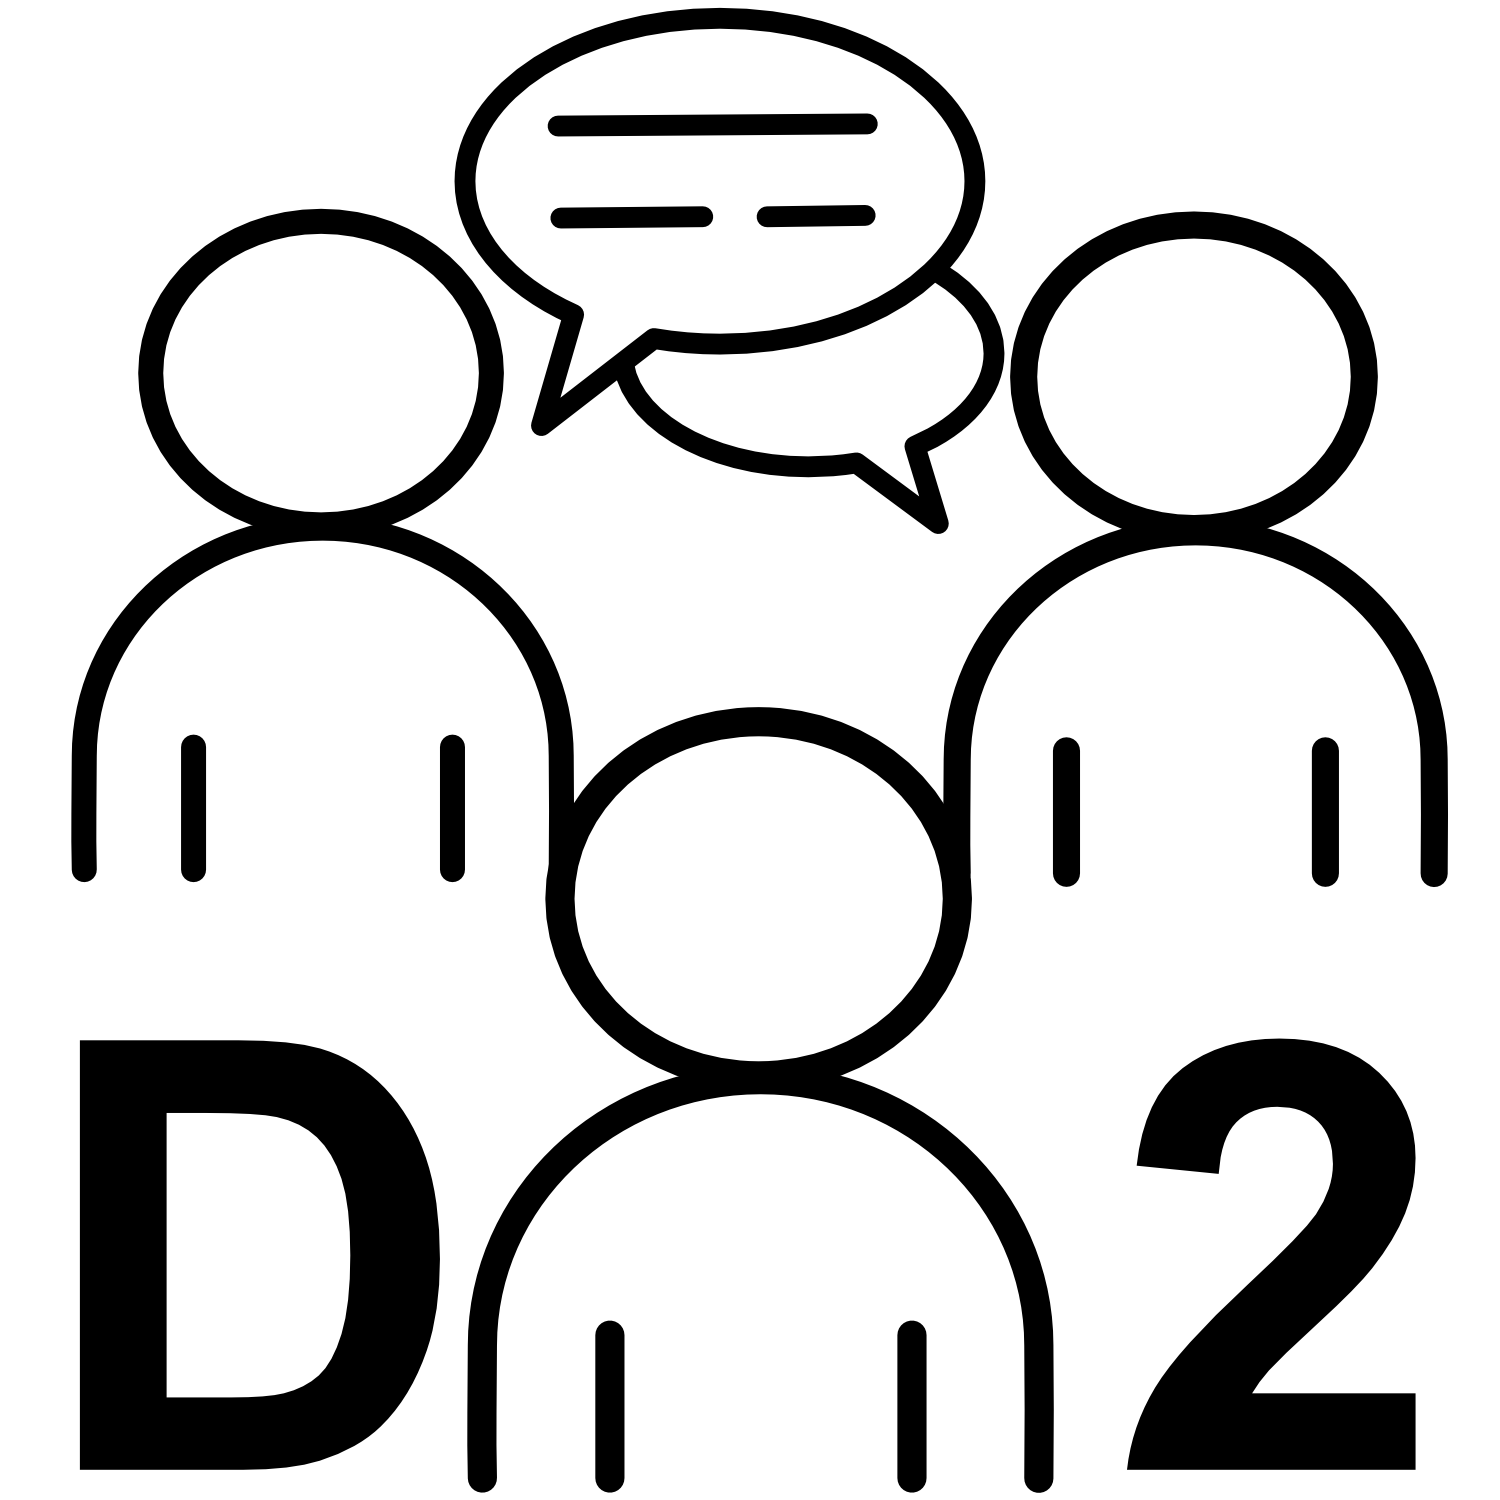 Symbol for the Debriefing Group 2. A Group of people talking.